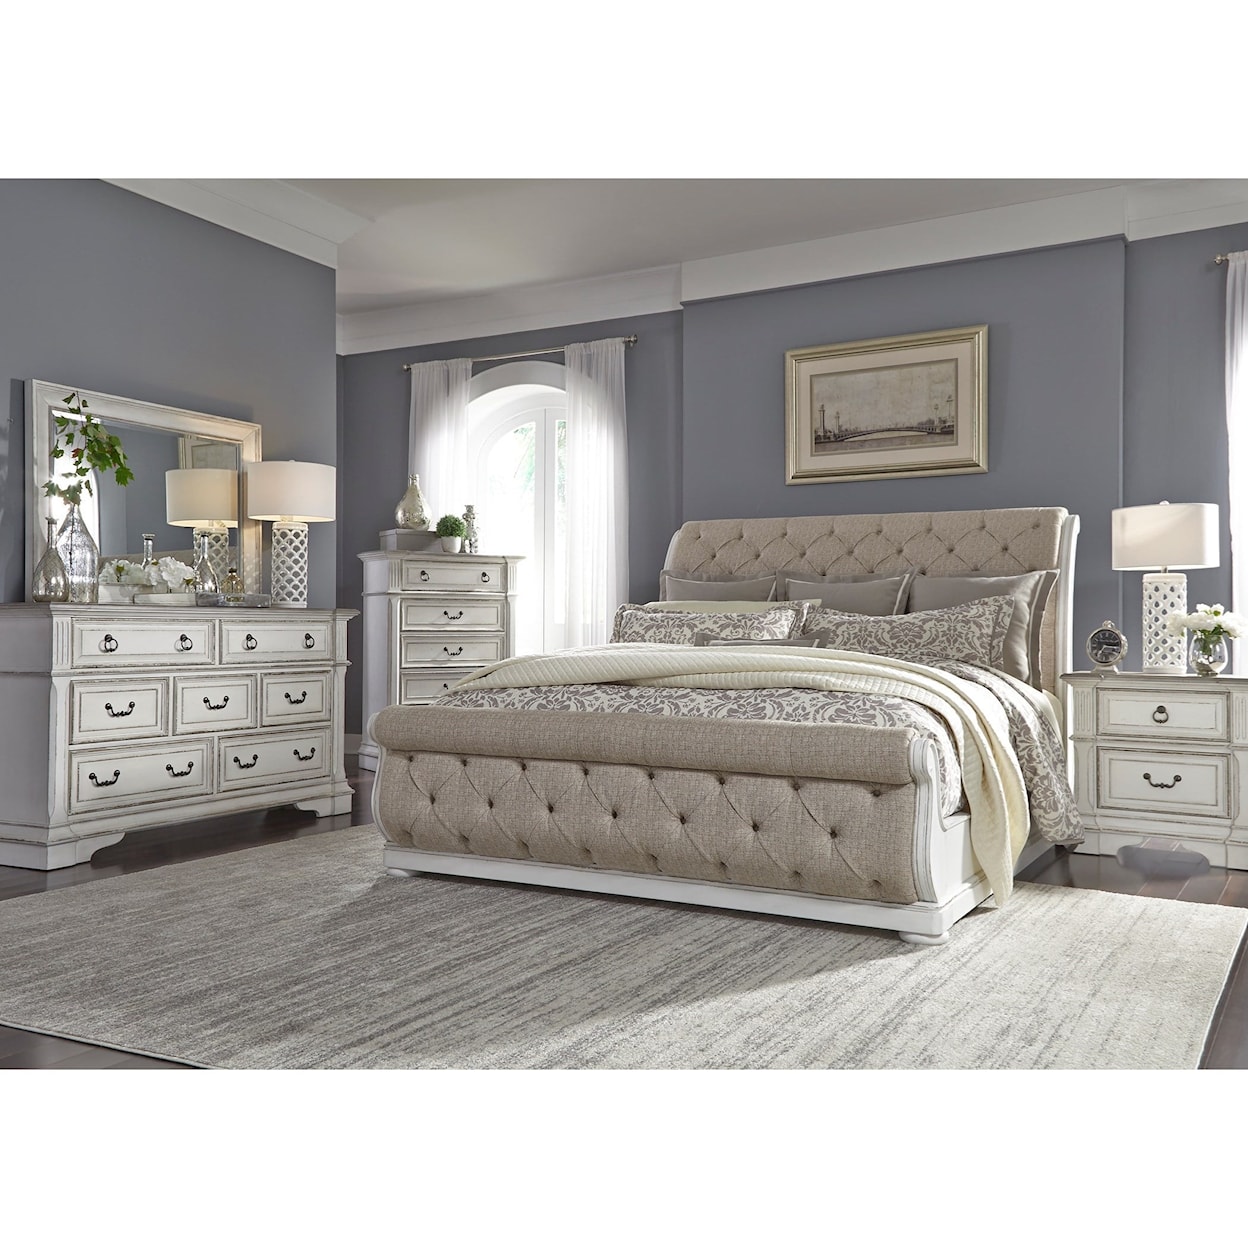 Libby Abbey Park 5-Piece Upholstered Queen Sleigh Bedroom Set